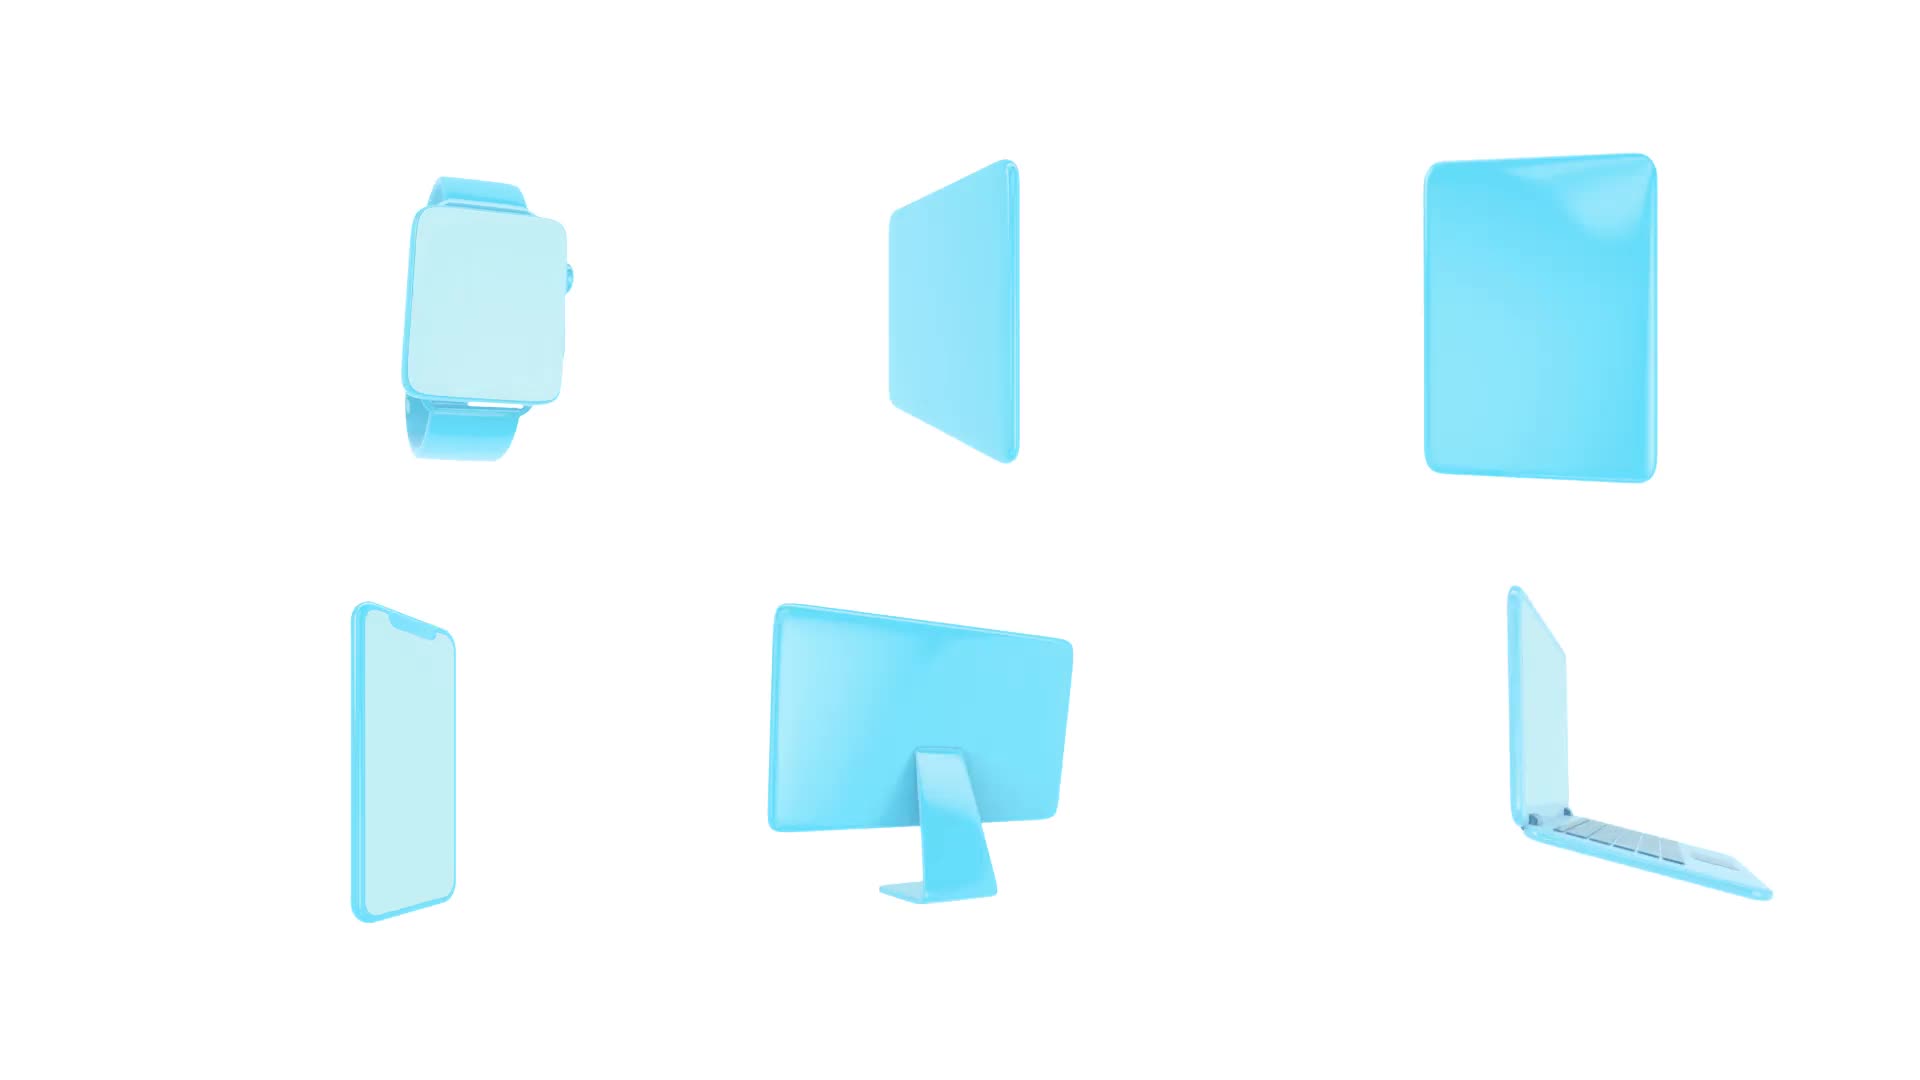  3D Icons for Explainer Video 